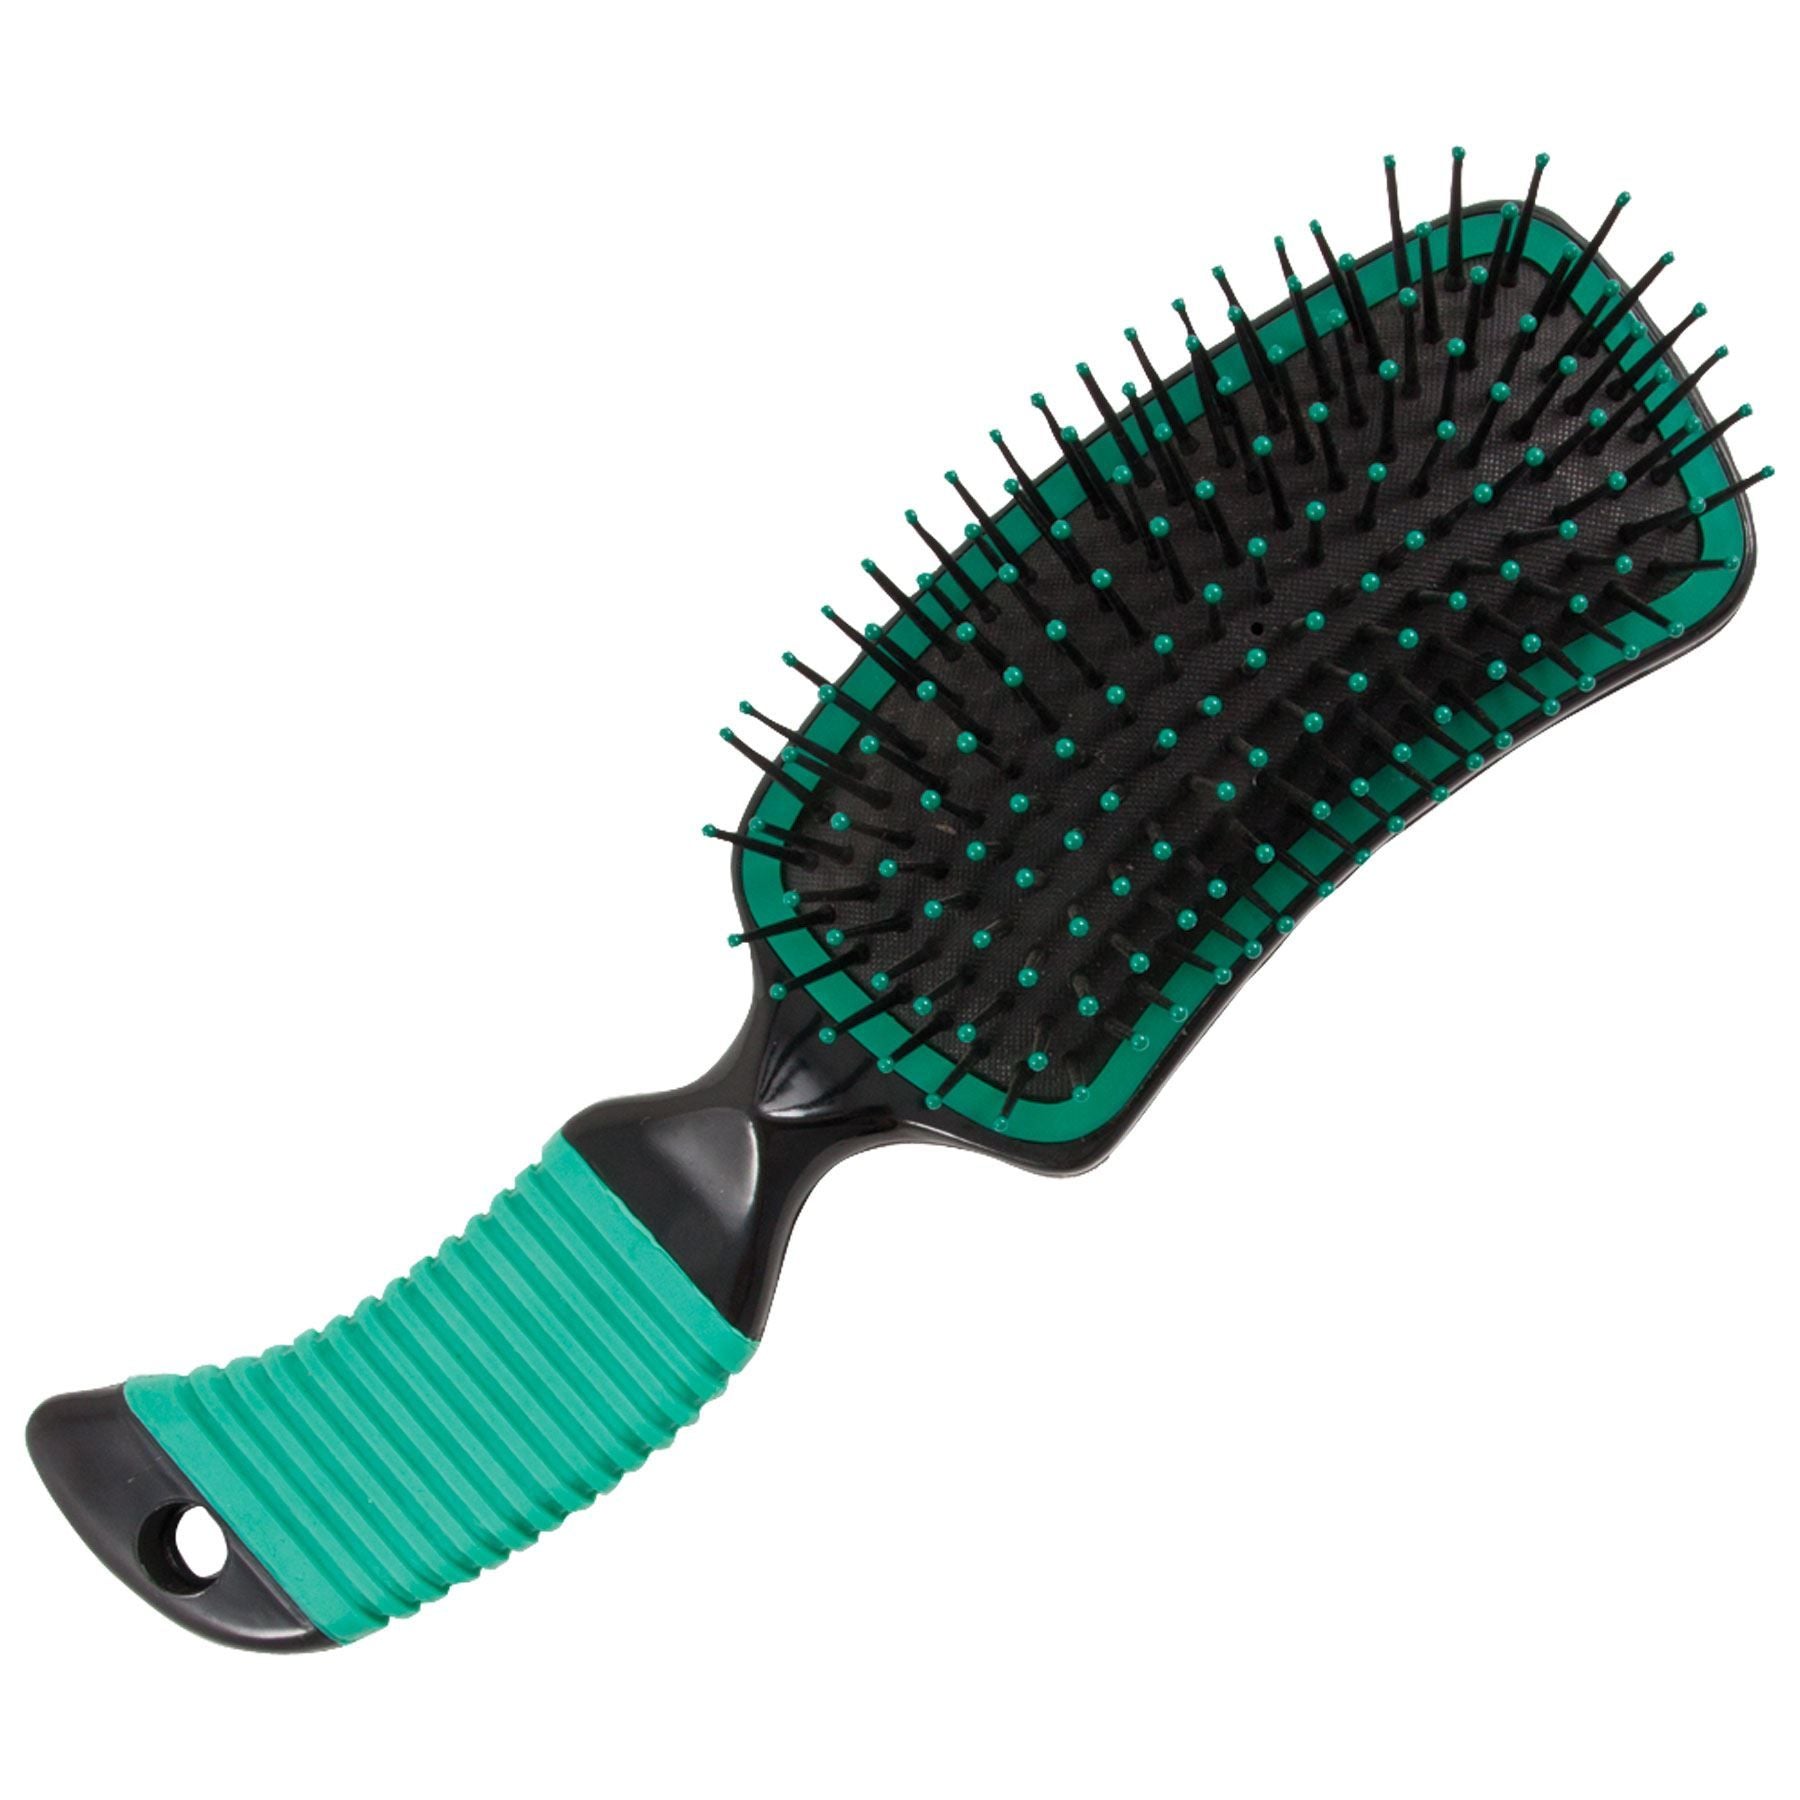 Curved Handle Brush